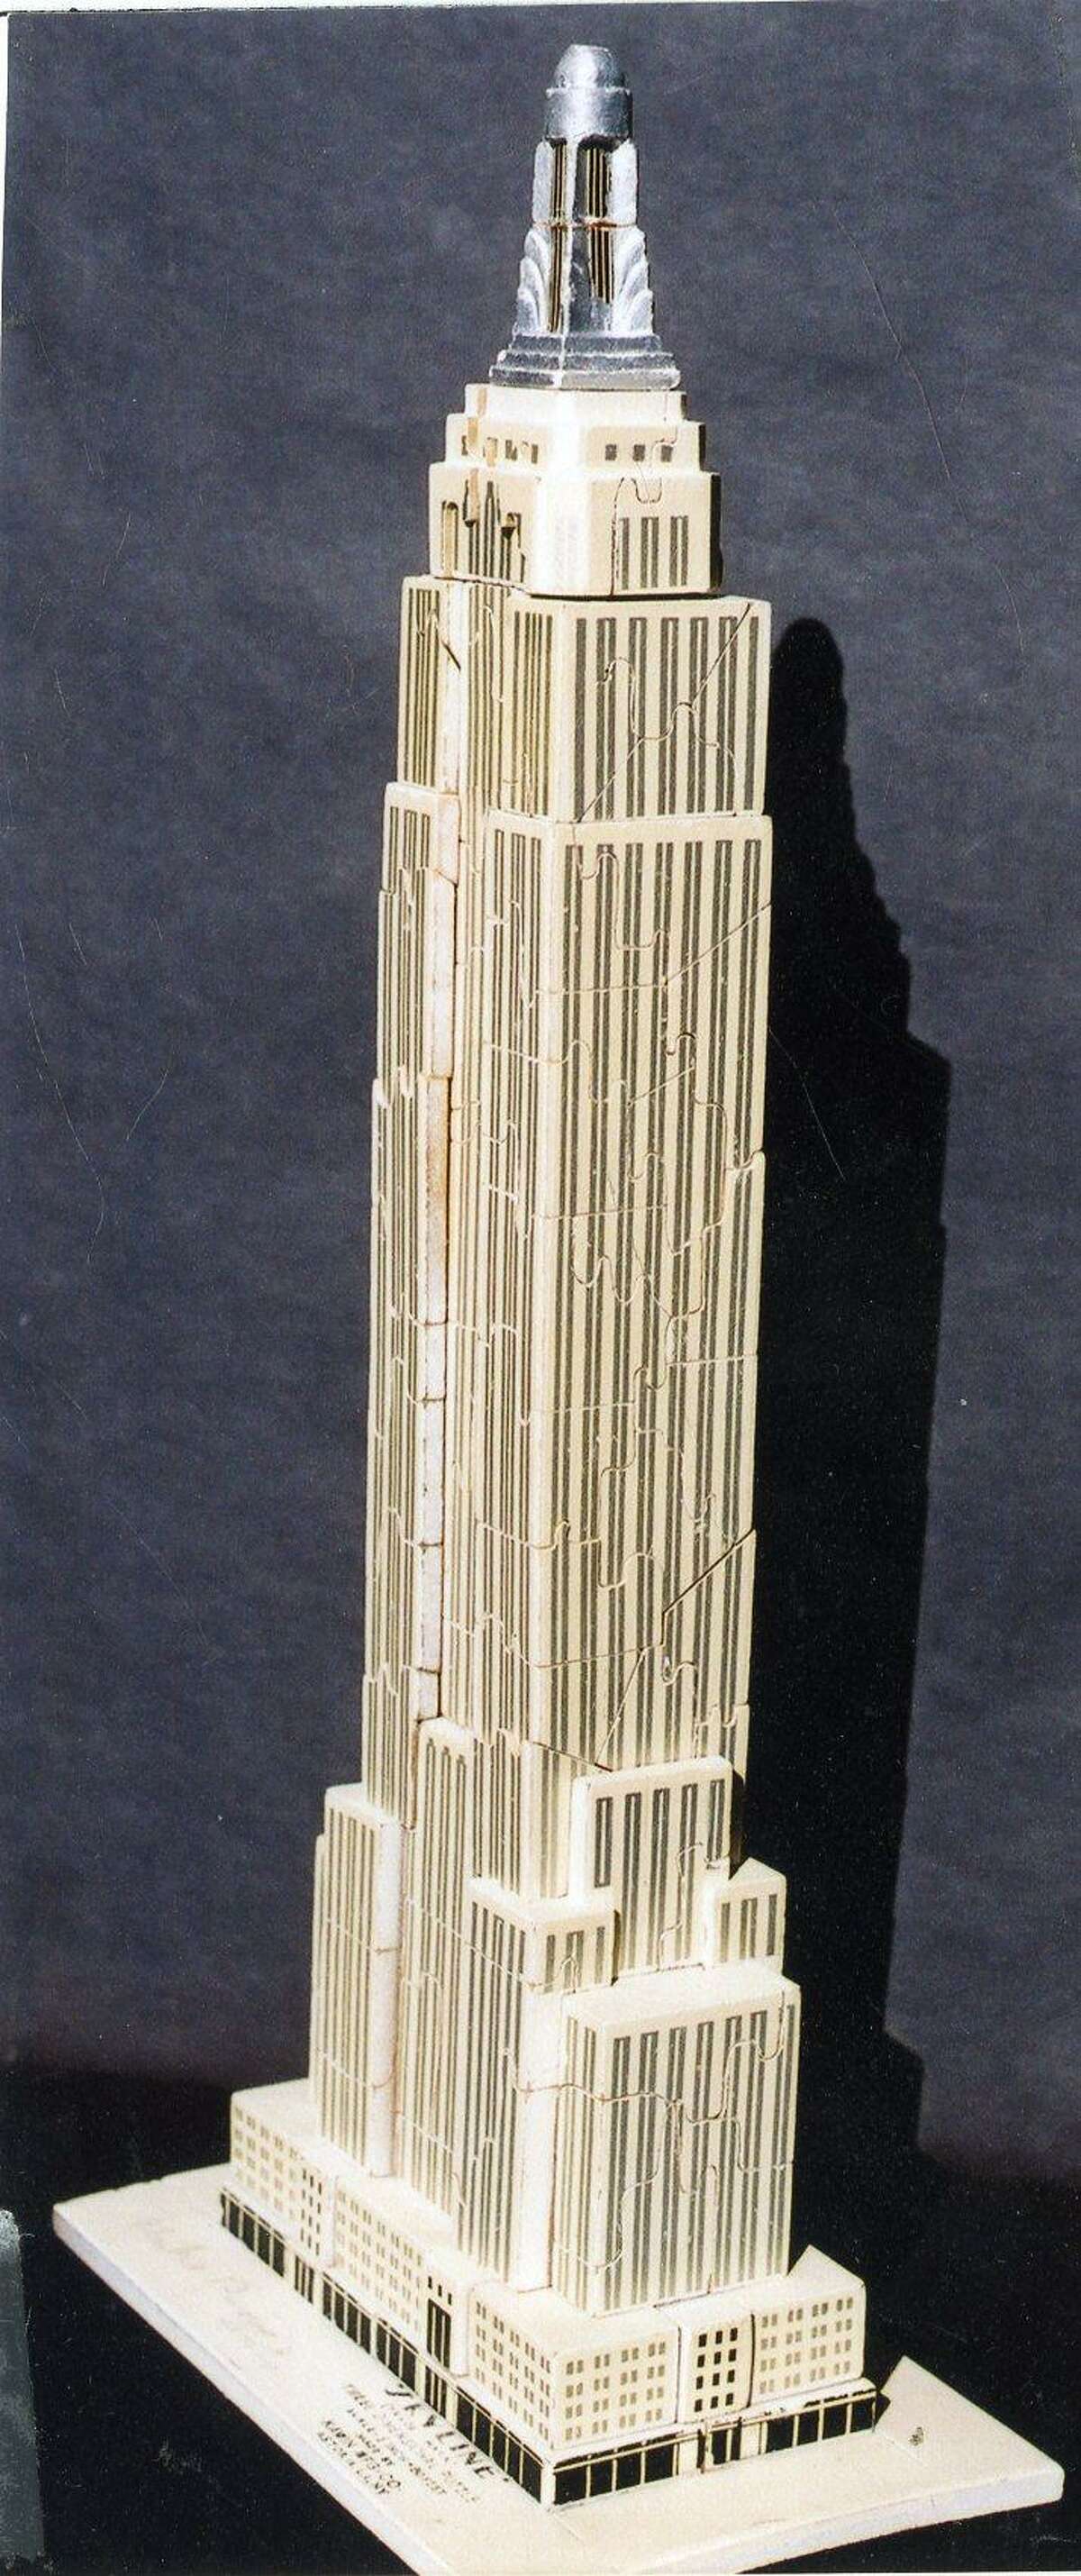 This three-dimensional puzzle of the Empire State Building was made by the Kawin Manufacturing Co. of Astoria, New York, around 1935. It's an example of the many puzzles created during the Depression era when they were popular.